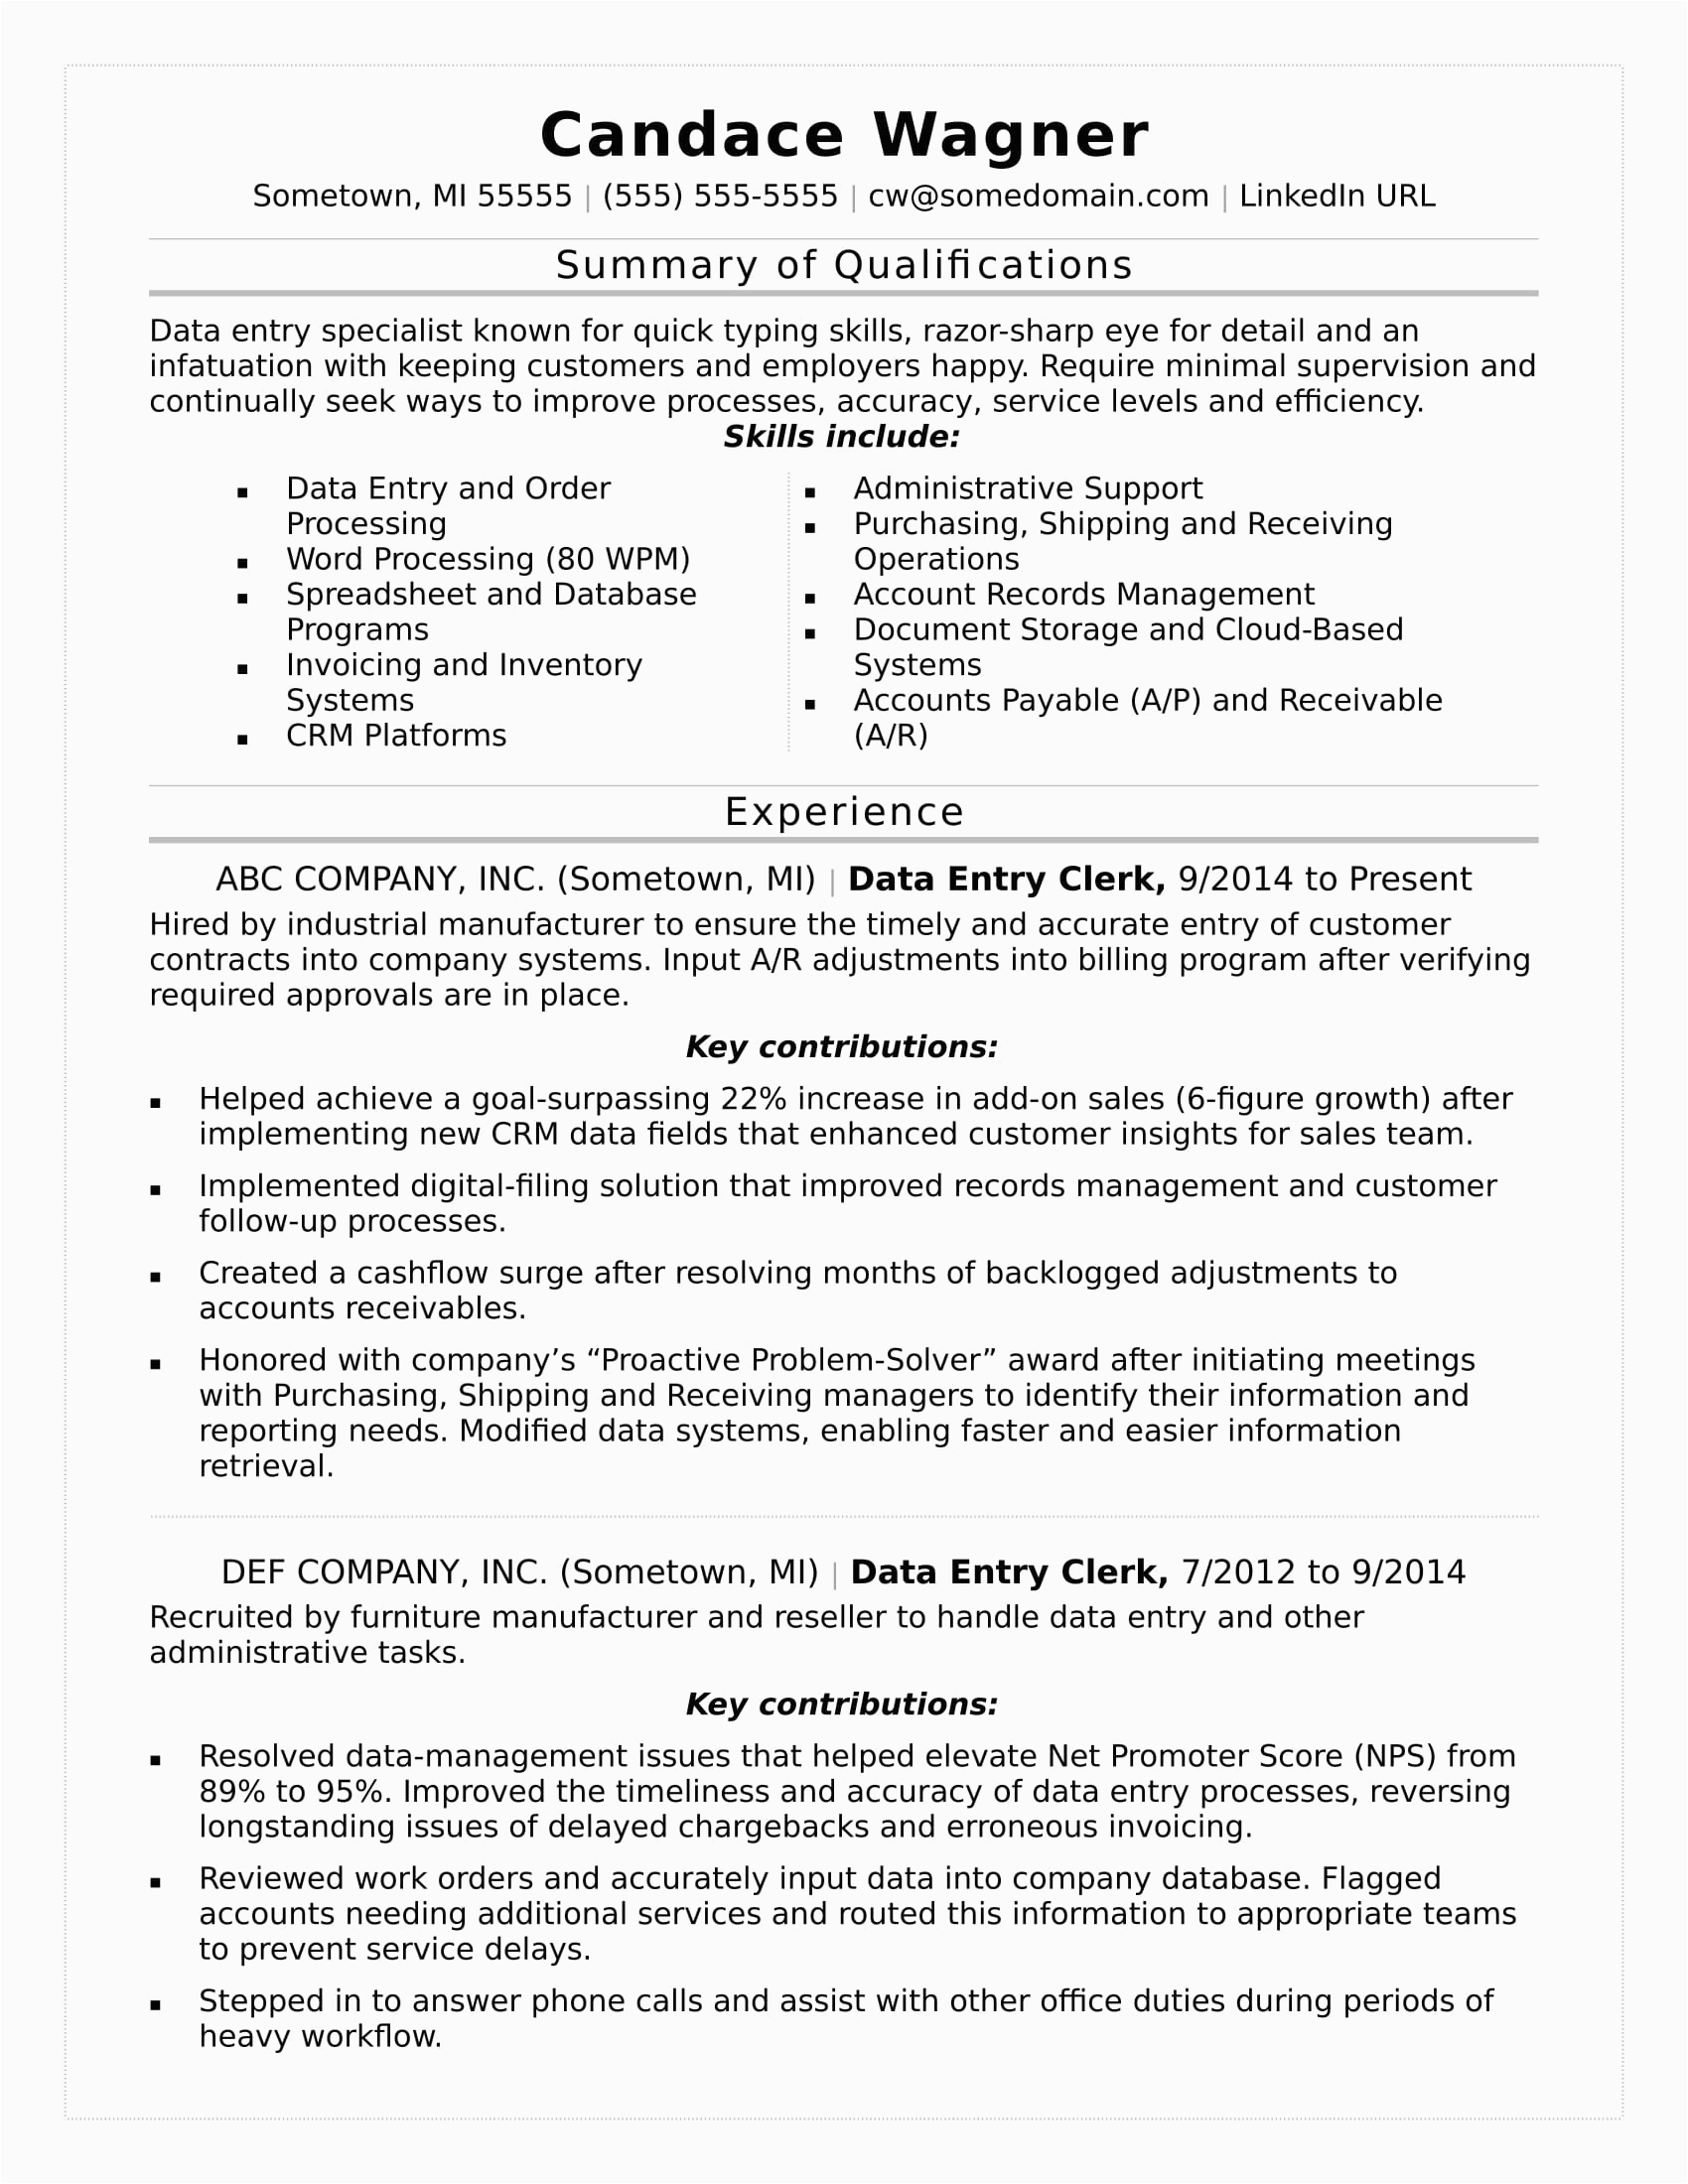 Data Entry Resume Sample with No Experience Pdf Sample Cover Letter Cover Letter for Data Entry Clerk